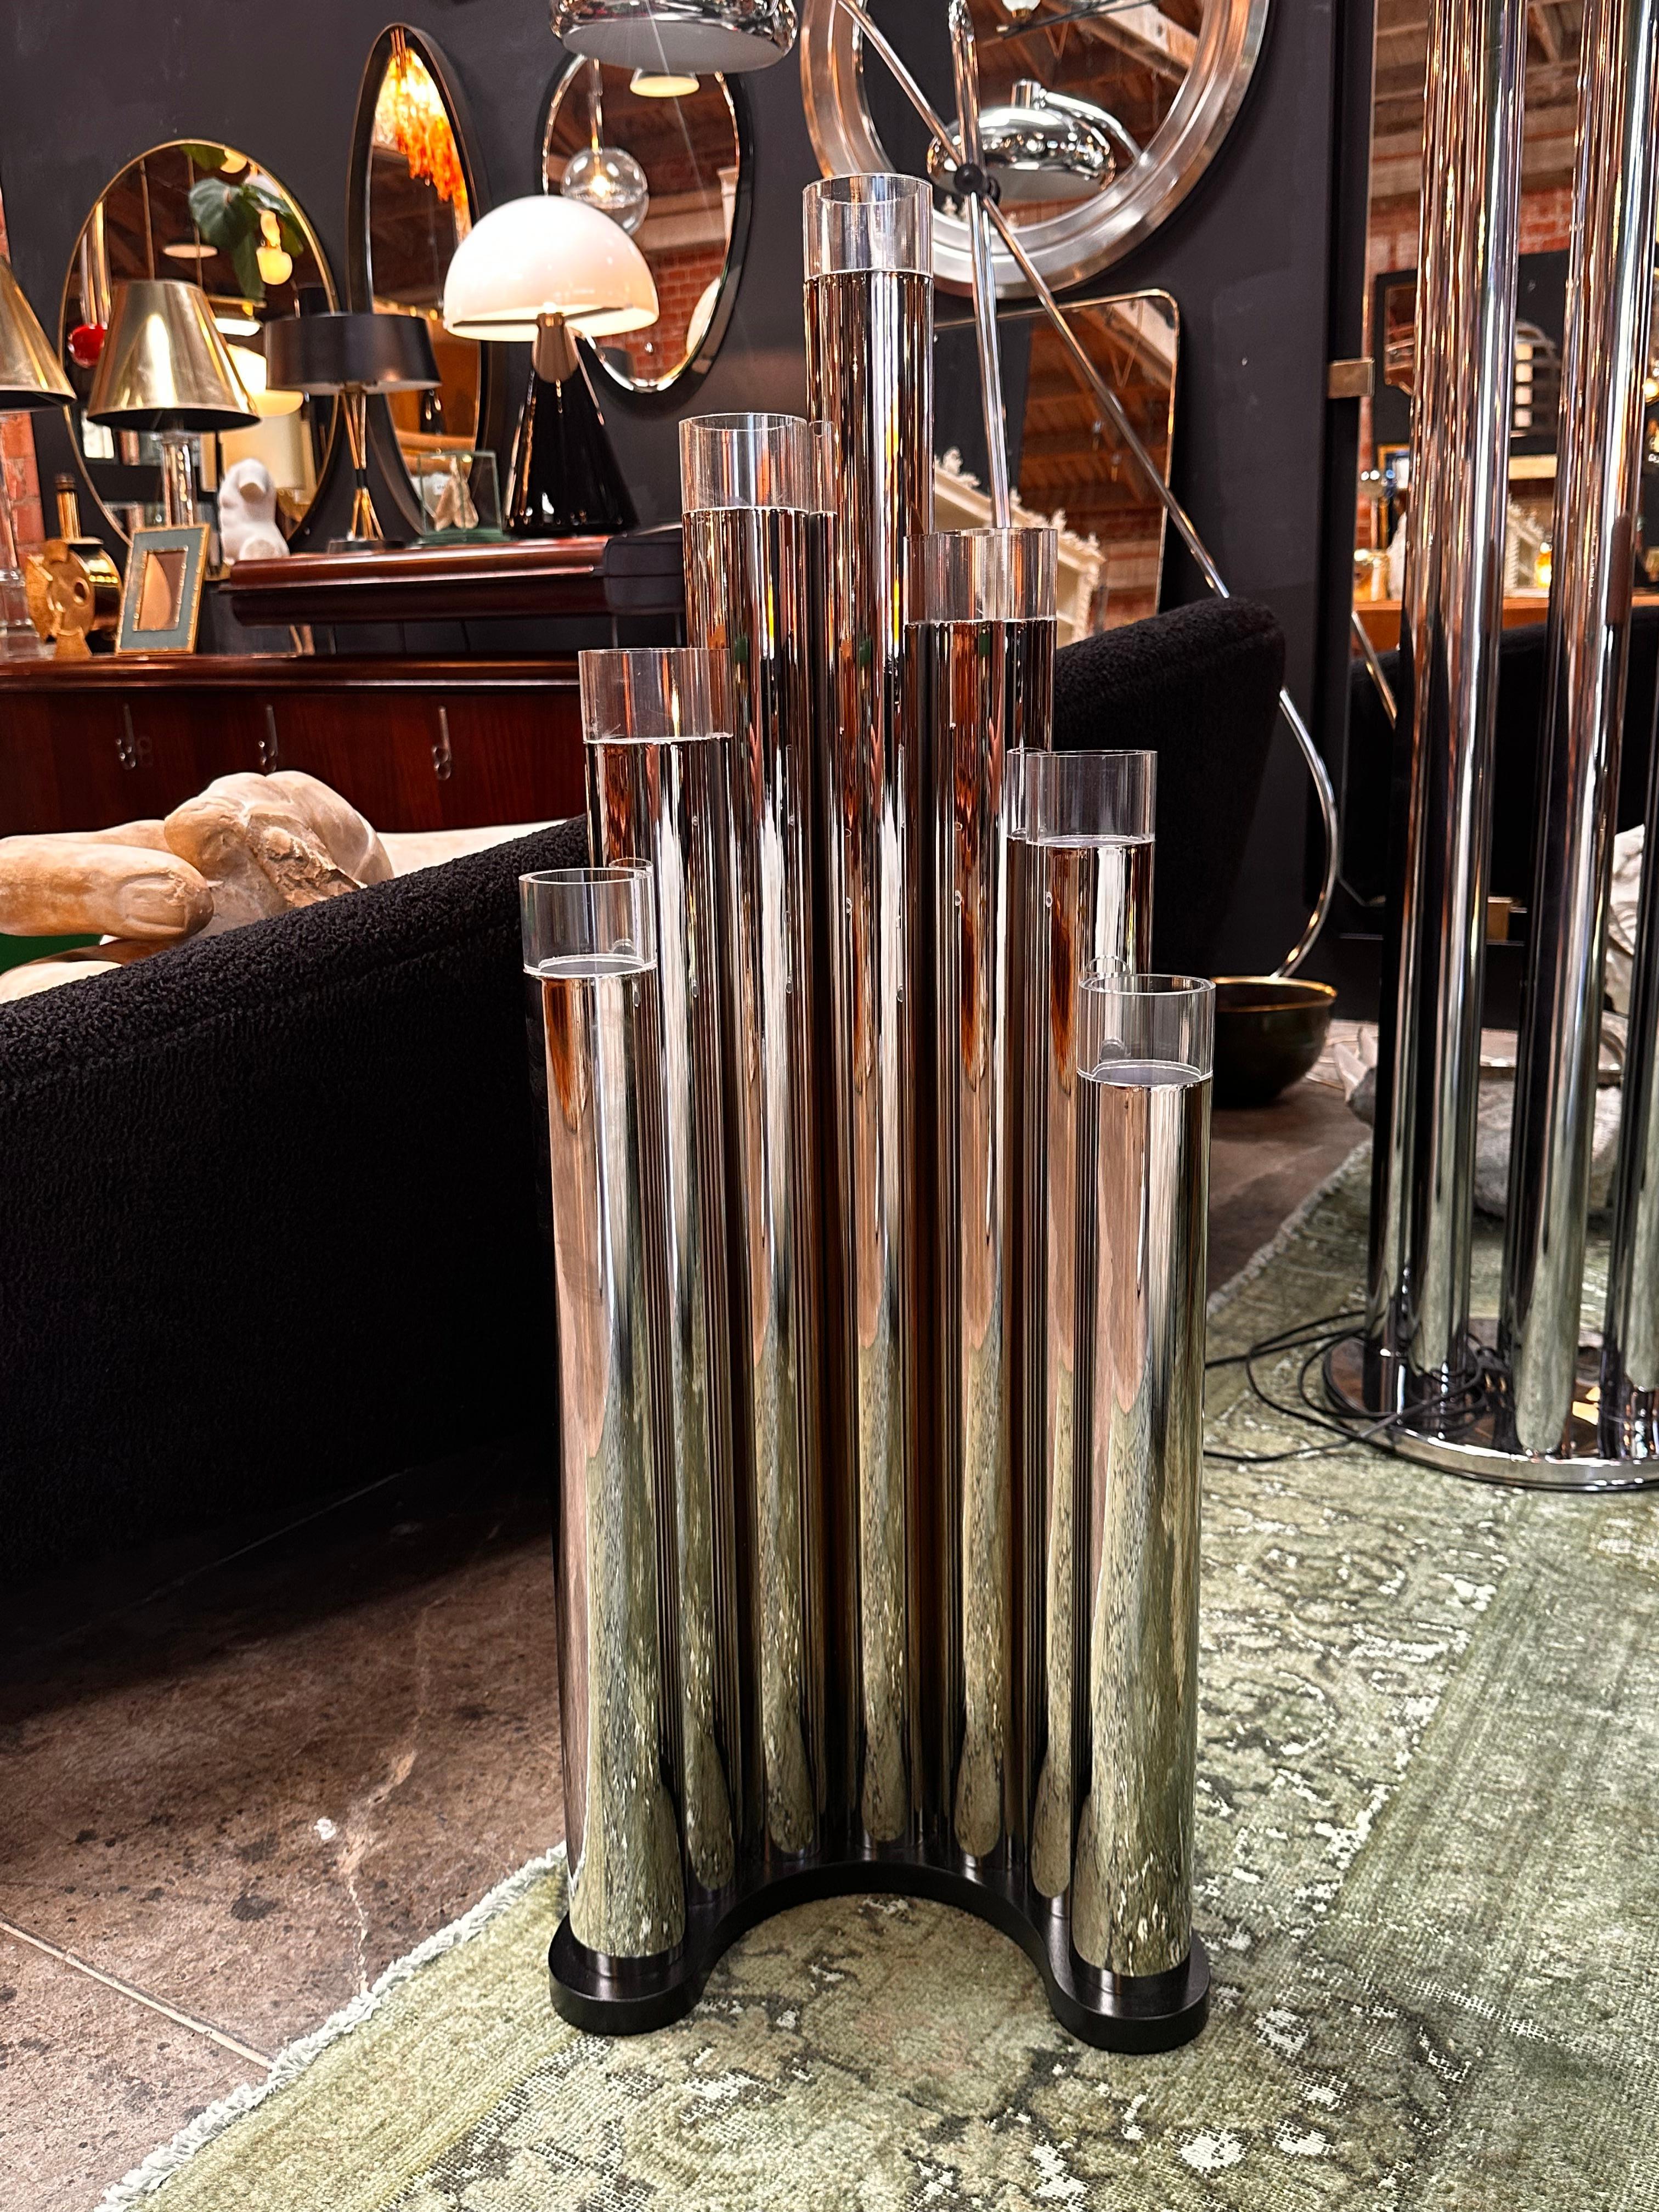 The Space Age Italian Organ Floor Lamp by Goffredo Reggiani, crafted in the 1970s, is a rare and highly collectible lighting masterpiece. Designed by the renowned Italian designer Goffredo Reggiani, this floor lamp features an organ-like structure